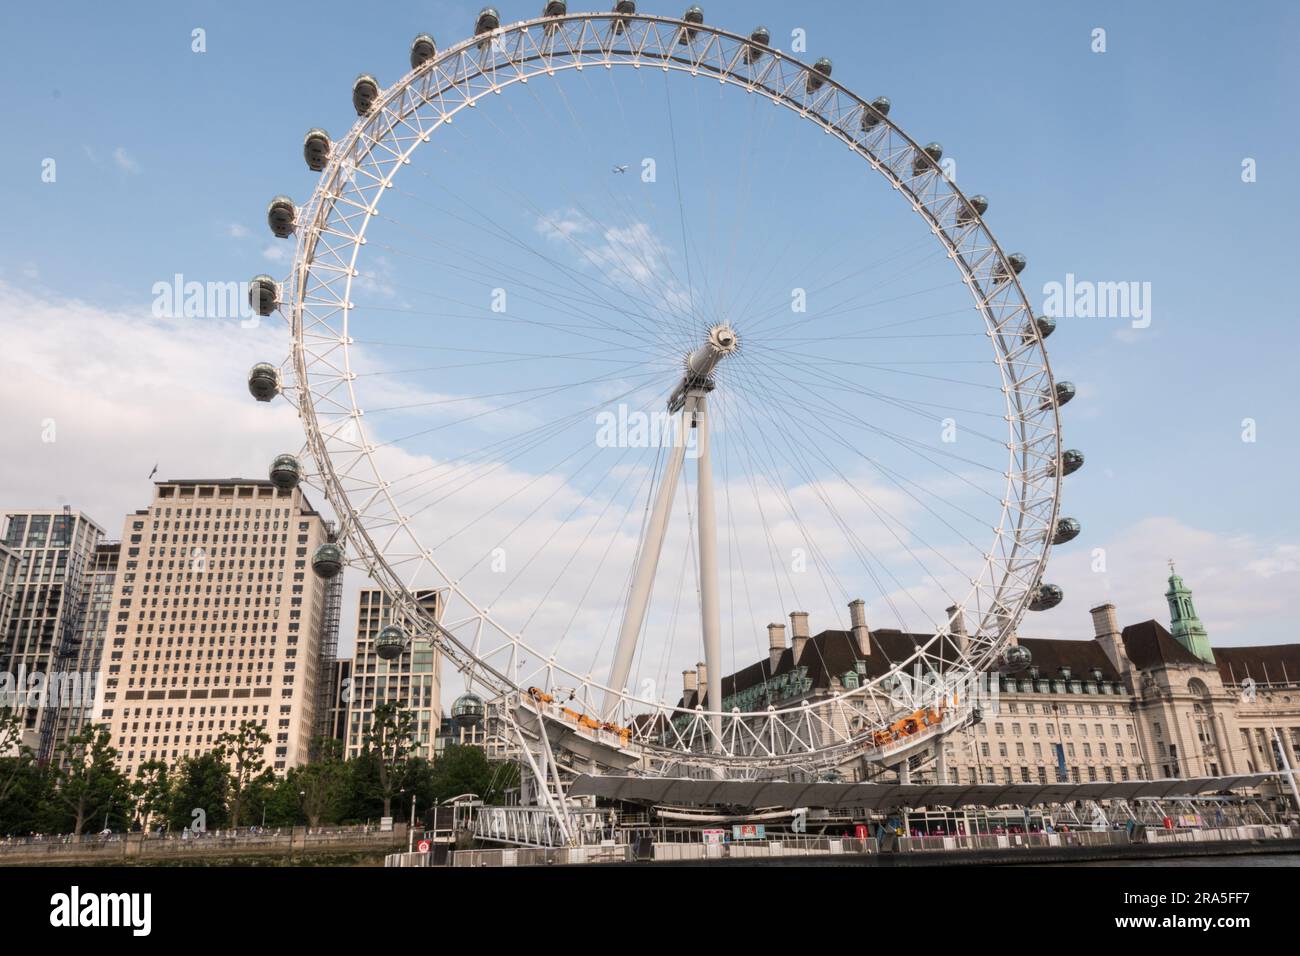 The Millenium Wheel sandwiched between the Shell Building and the old London County Hall on the South Bank of the River Thames, London, England, U.K. Stock Photo